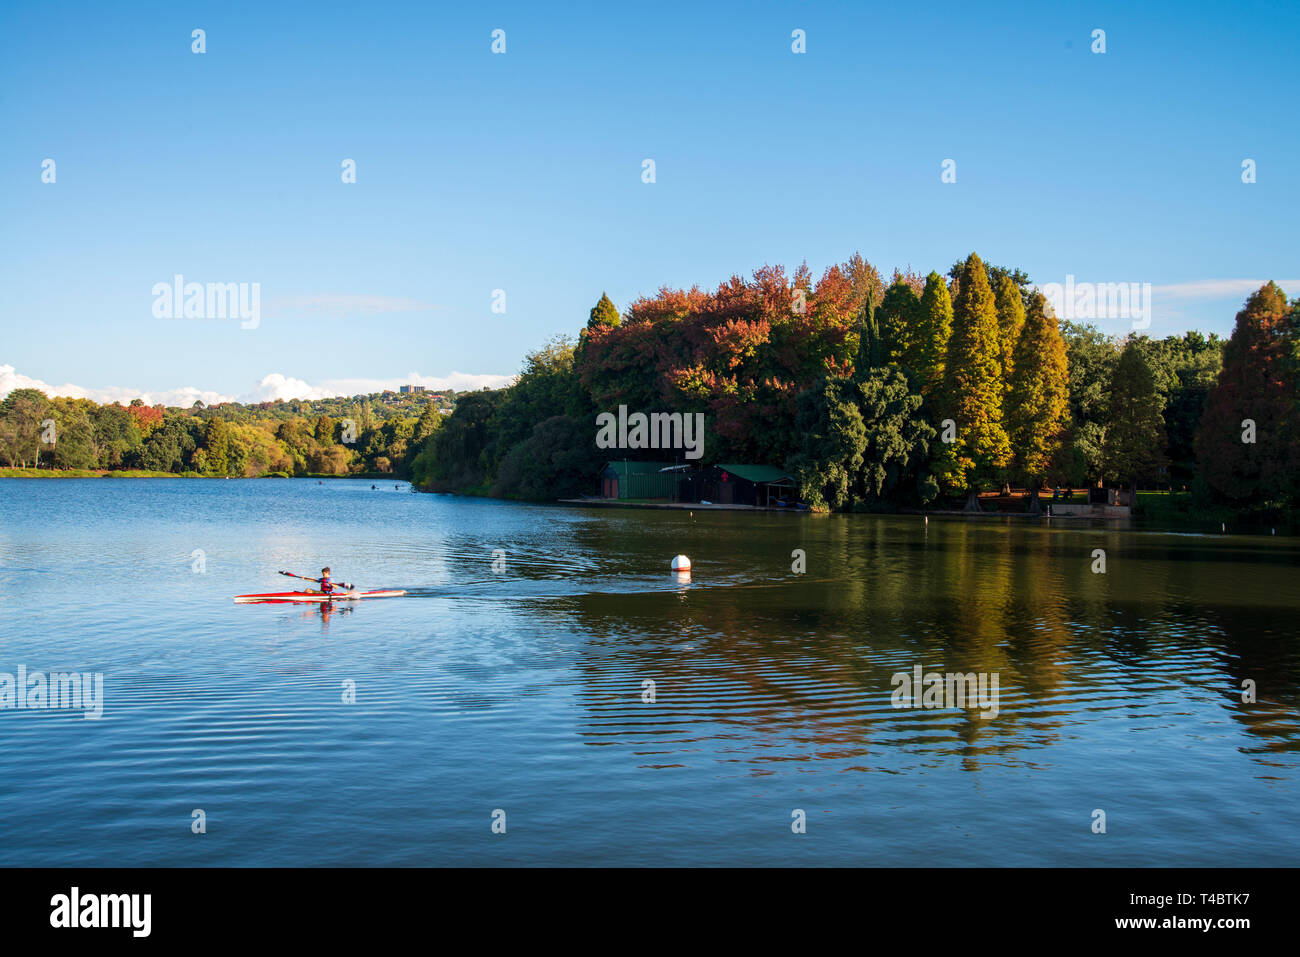 Johannesburg, South Africa, 15 April, 2019. A paddler on Emmerentia Dam, which is lit up by utumn leaves and blue skies, on Monday afternoon. Credit: Eva-Lotta Jansson/Alamy Stock Photo